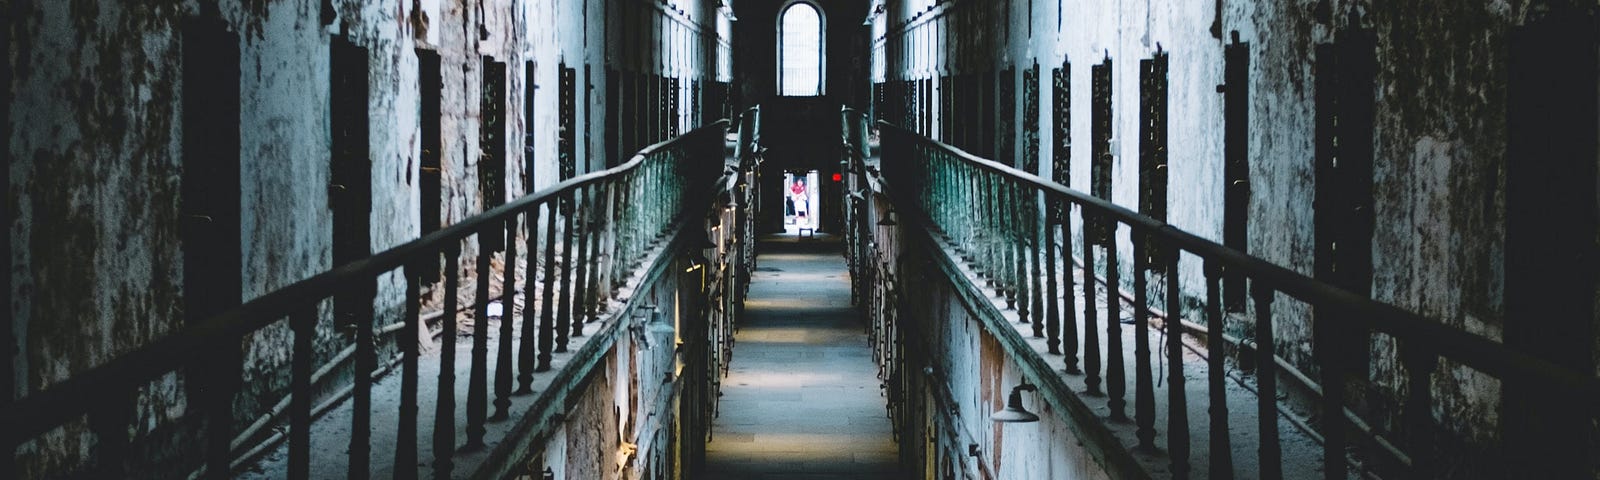 A young woman walks down a long hallway of what appears to be a narrow, old prison. A new TikTok trend blends physical activity and environmental exposure. This essay explores stealth strolling, the hush-hush trend taking social media by whisper.